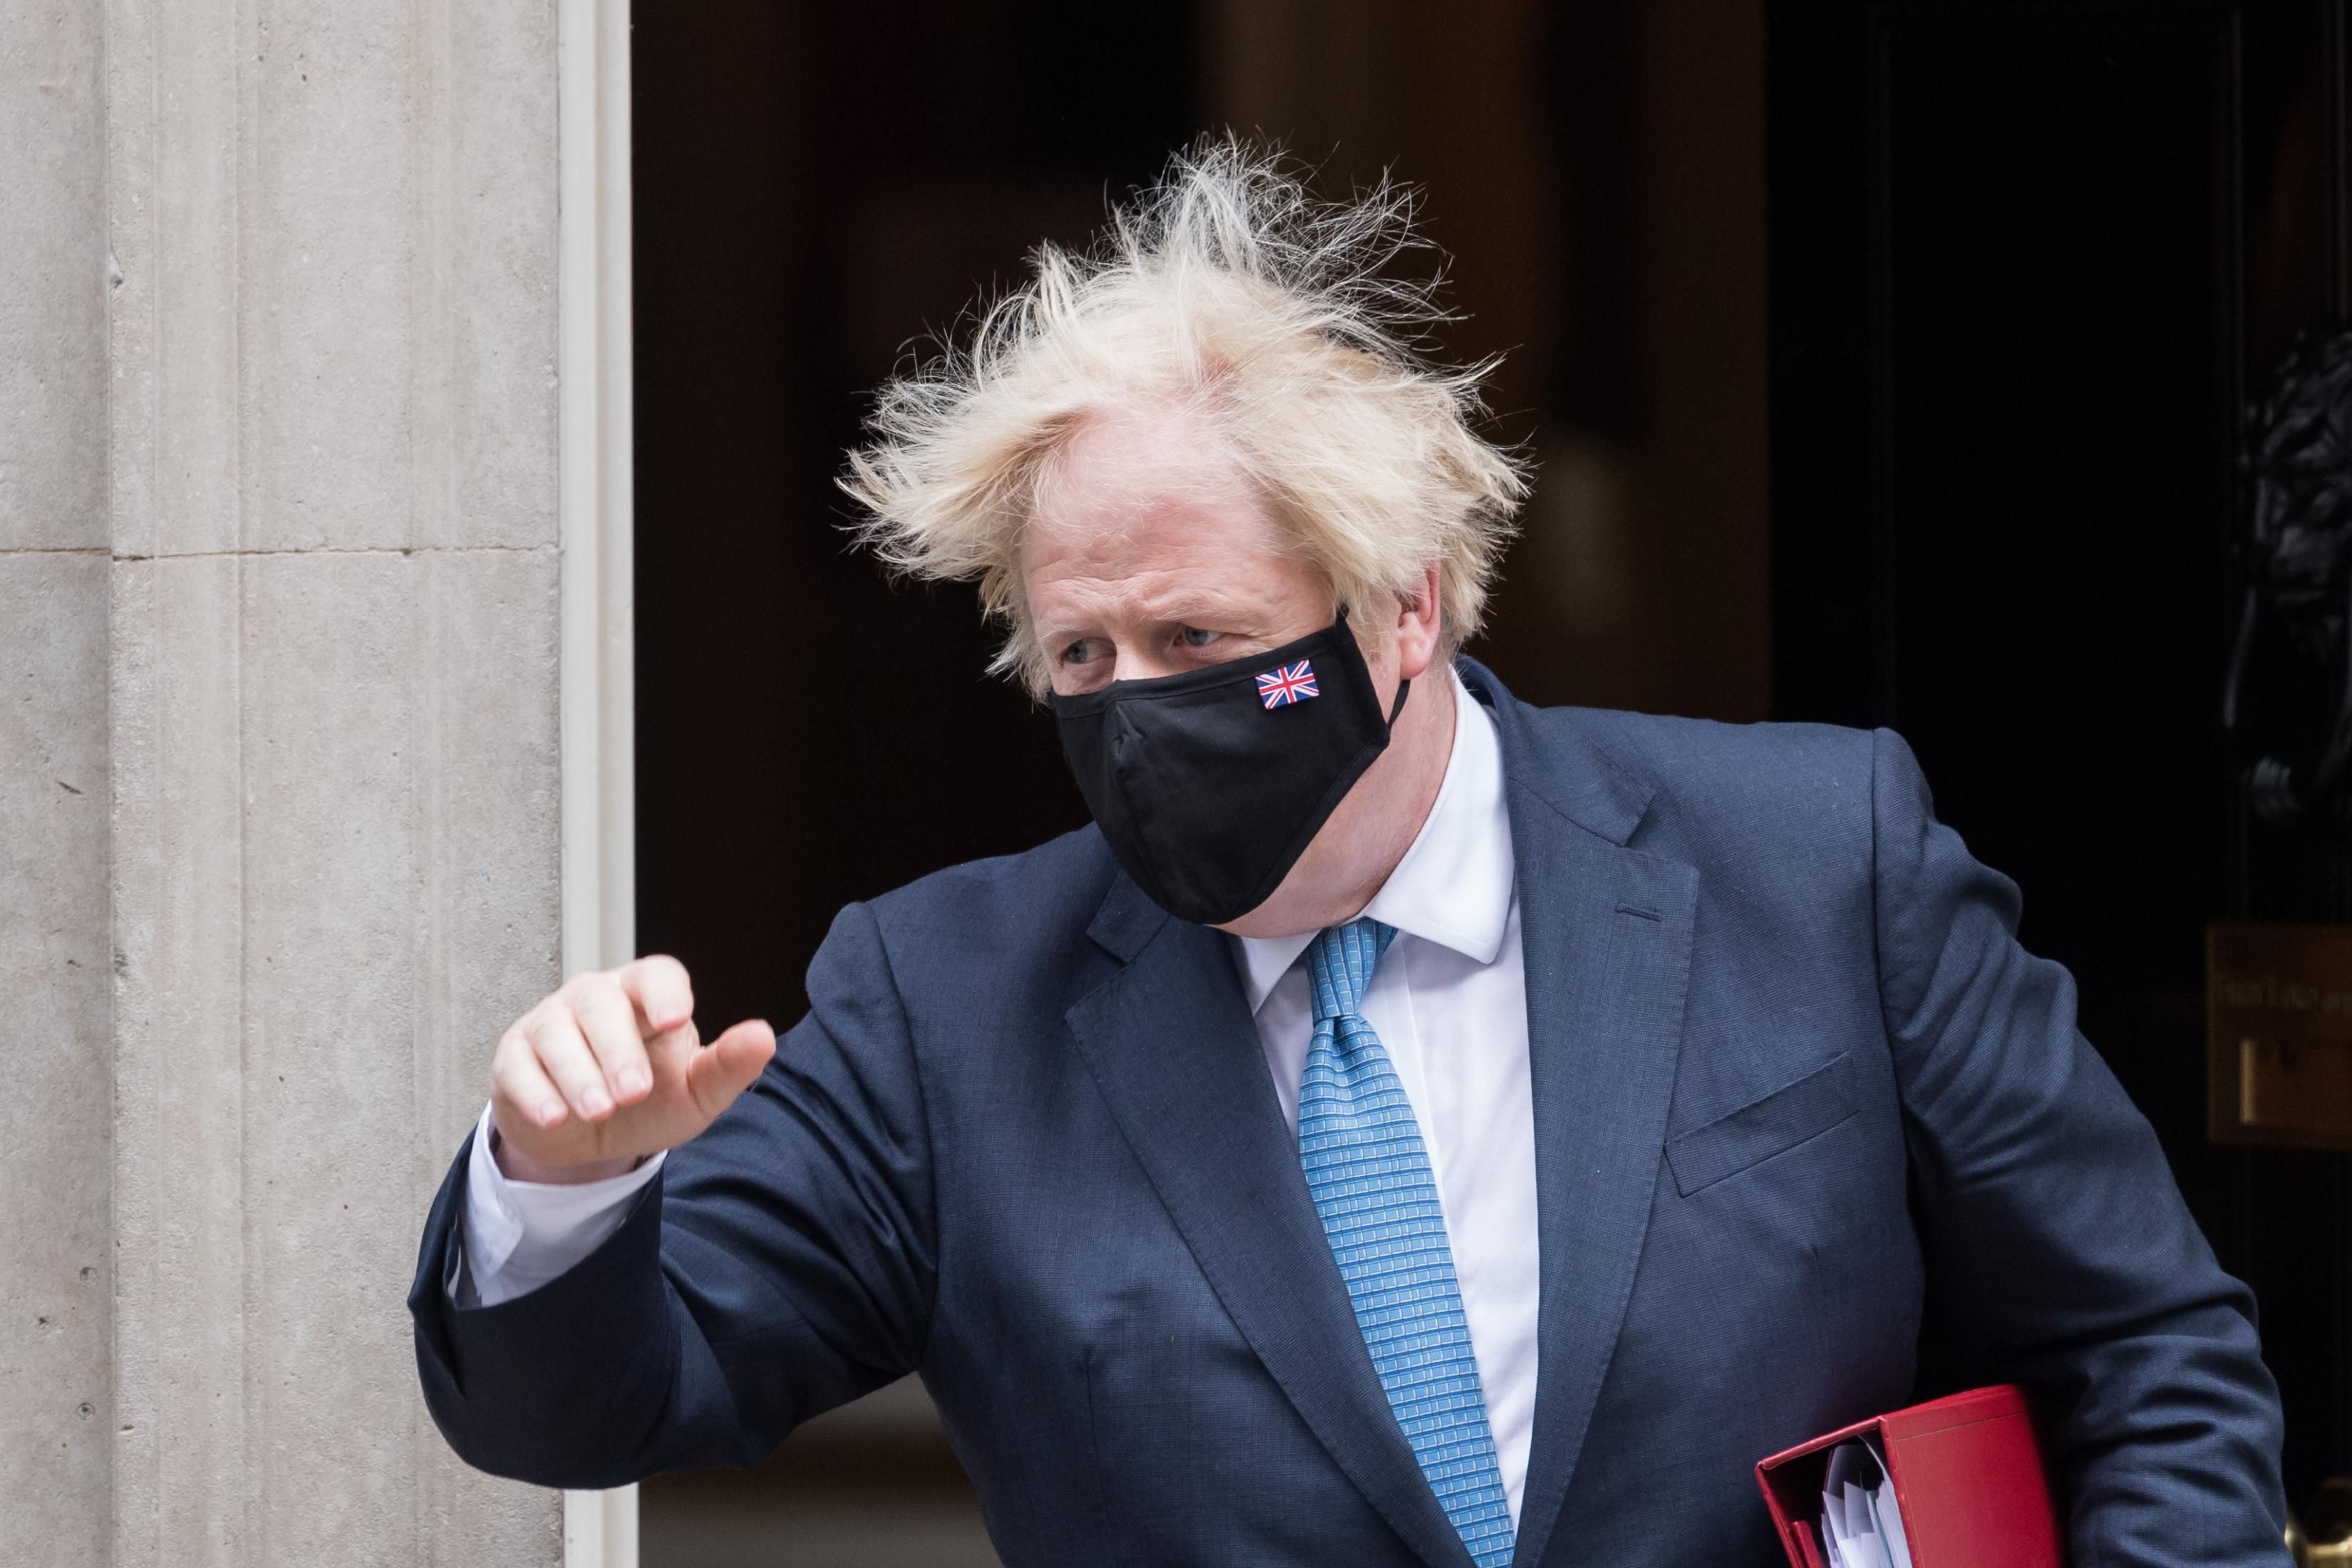 British Prime Minister Boris Johnson leaves 10 Downing Street for a press conference at the House of Commons on July 14, 2021 in London, England. (Photo: Wiktor Szymanowicz/Barcroft Media via Getty Images)